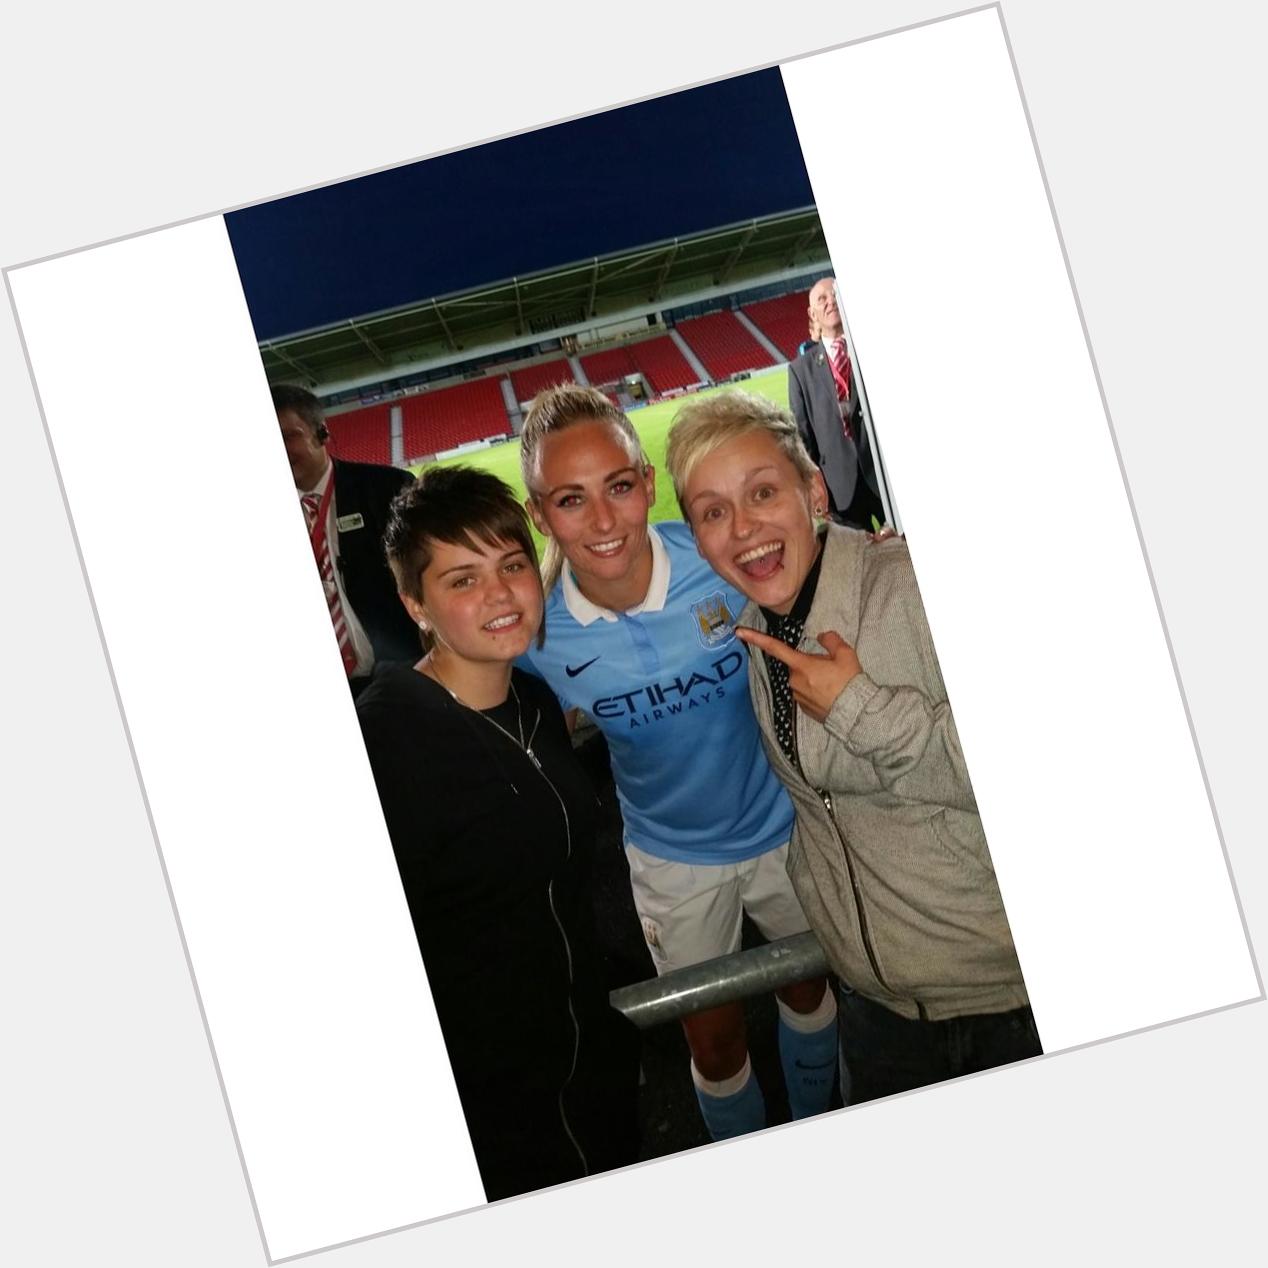 Loved meeting at Donny Belles on Thursday. She\s absolutely lovely. Happy birthday, have a great day x 